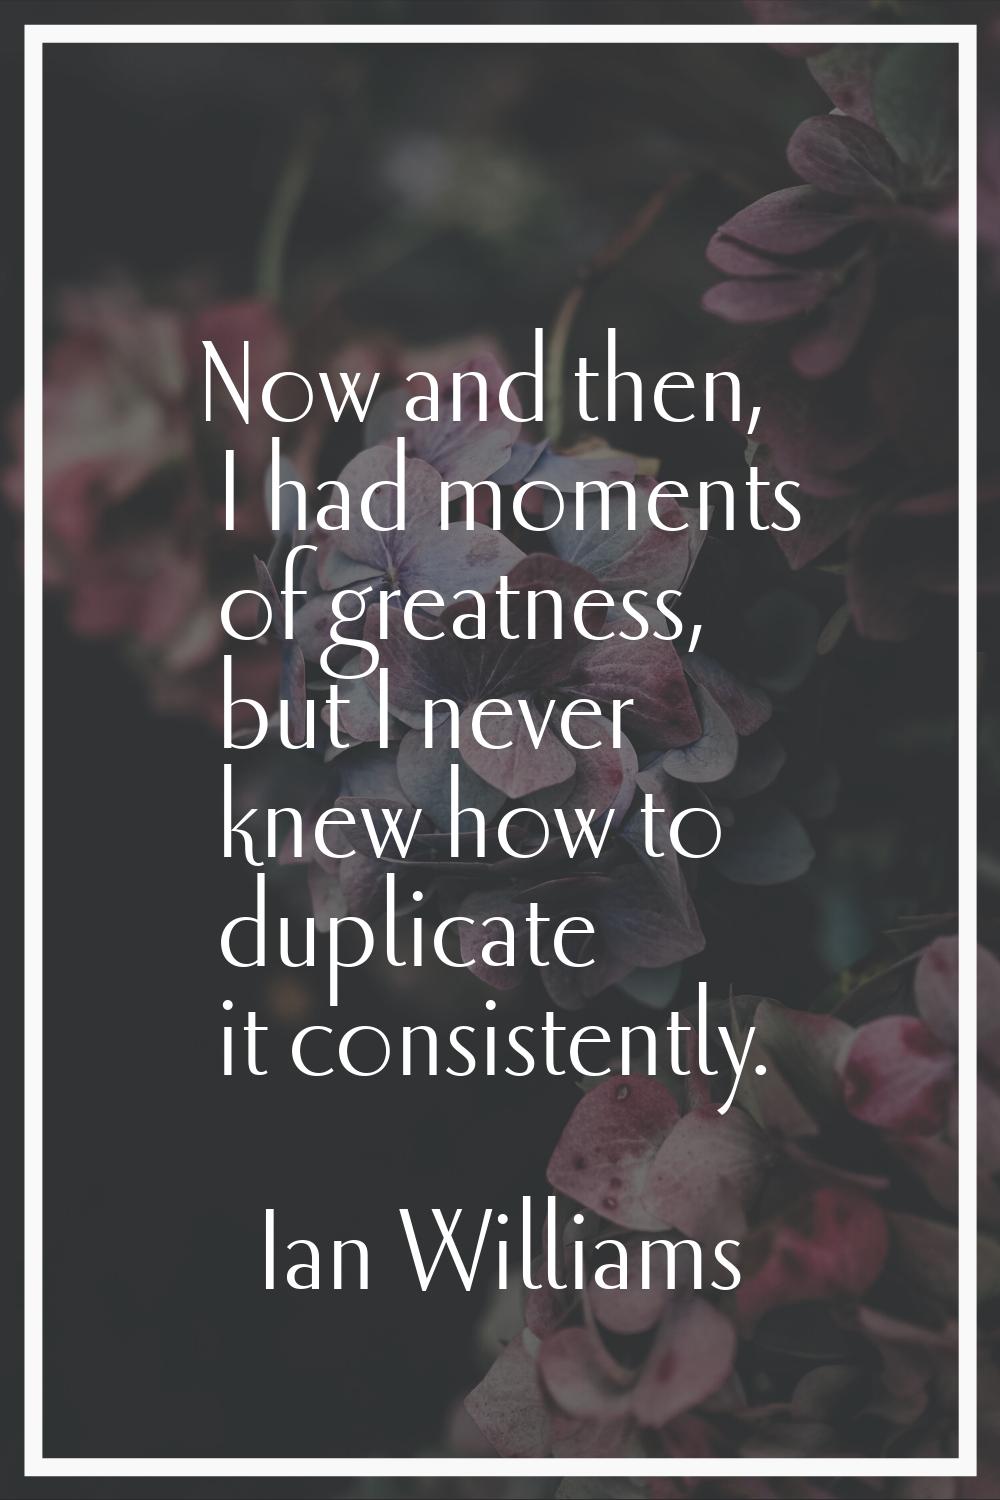 Now and then, I had moments of greatness, but I never knew how to duplicate it consistently.